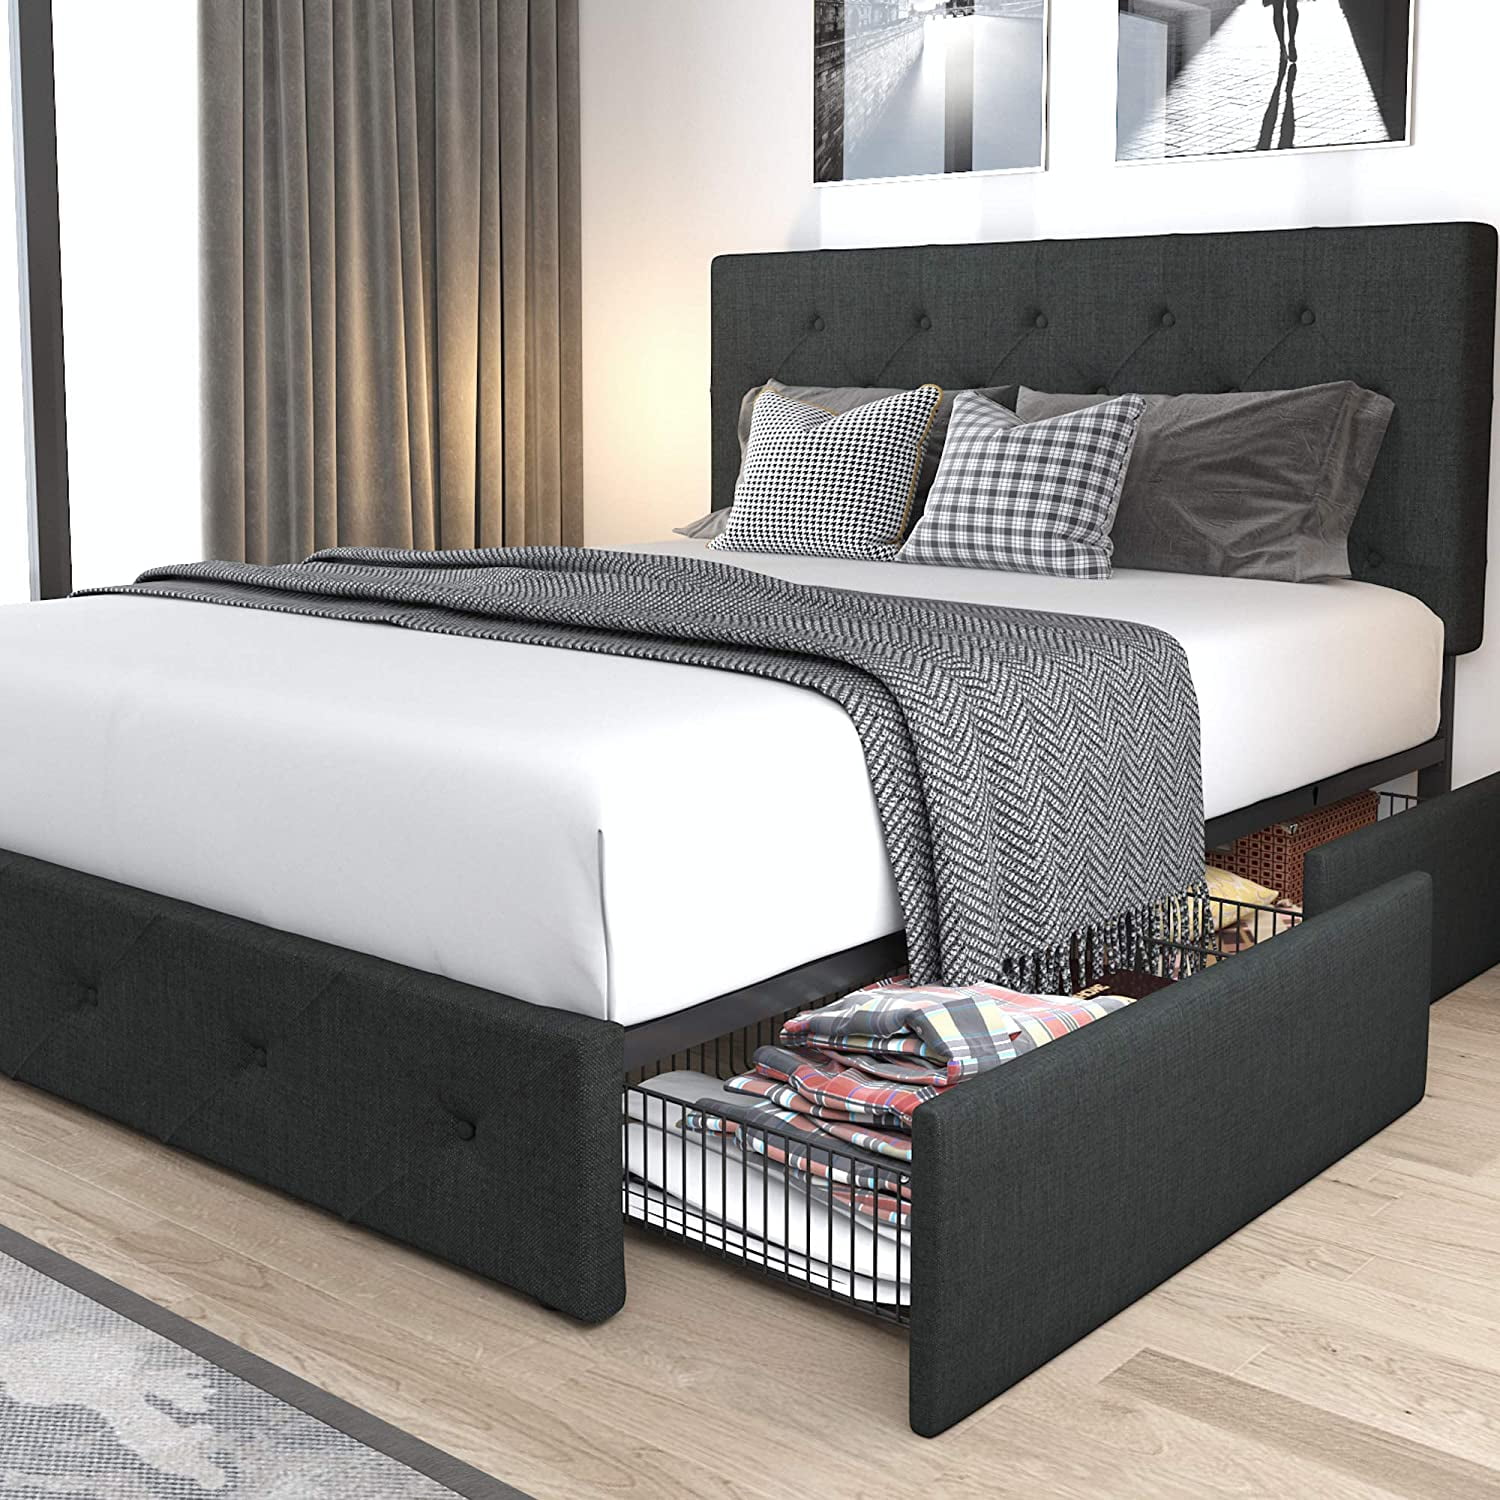 Allewie Queen Platform Bed Frame With 4, Black Bed Frame With Drawers Queen